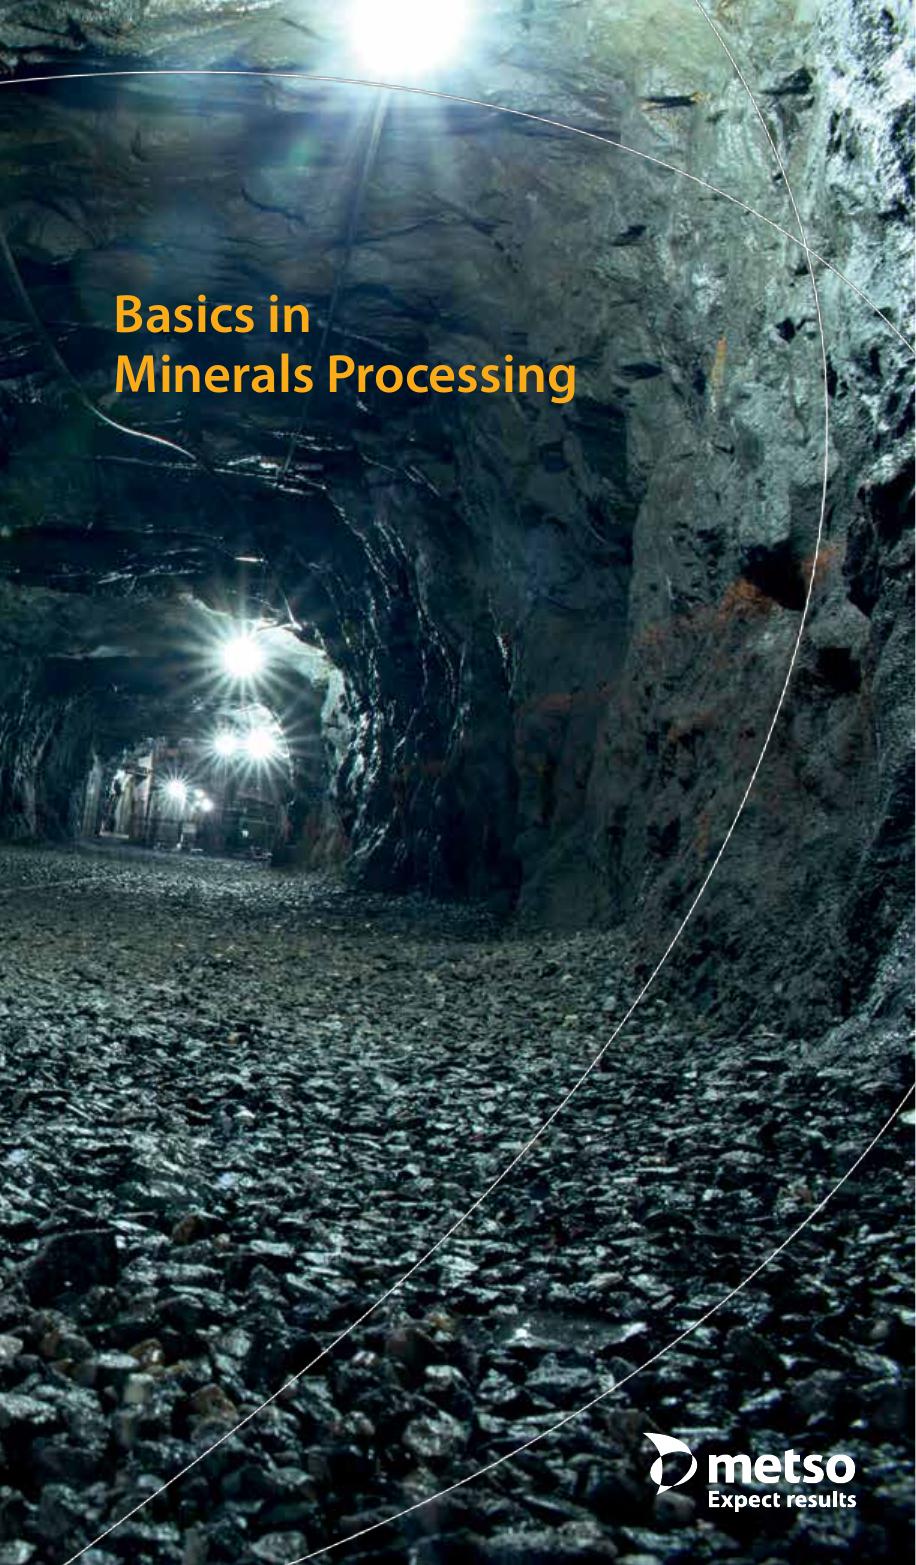 Basics in Minerals Processing 2016